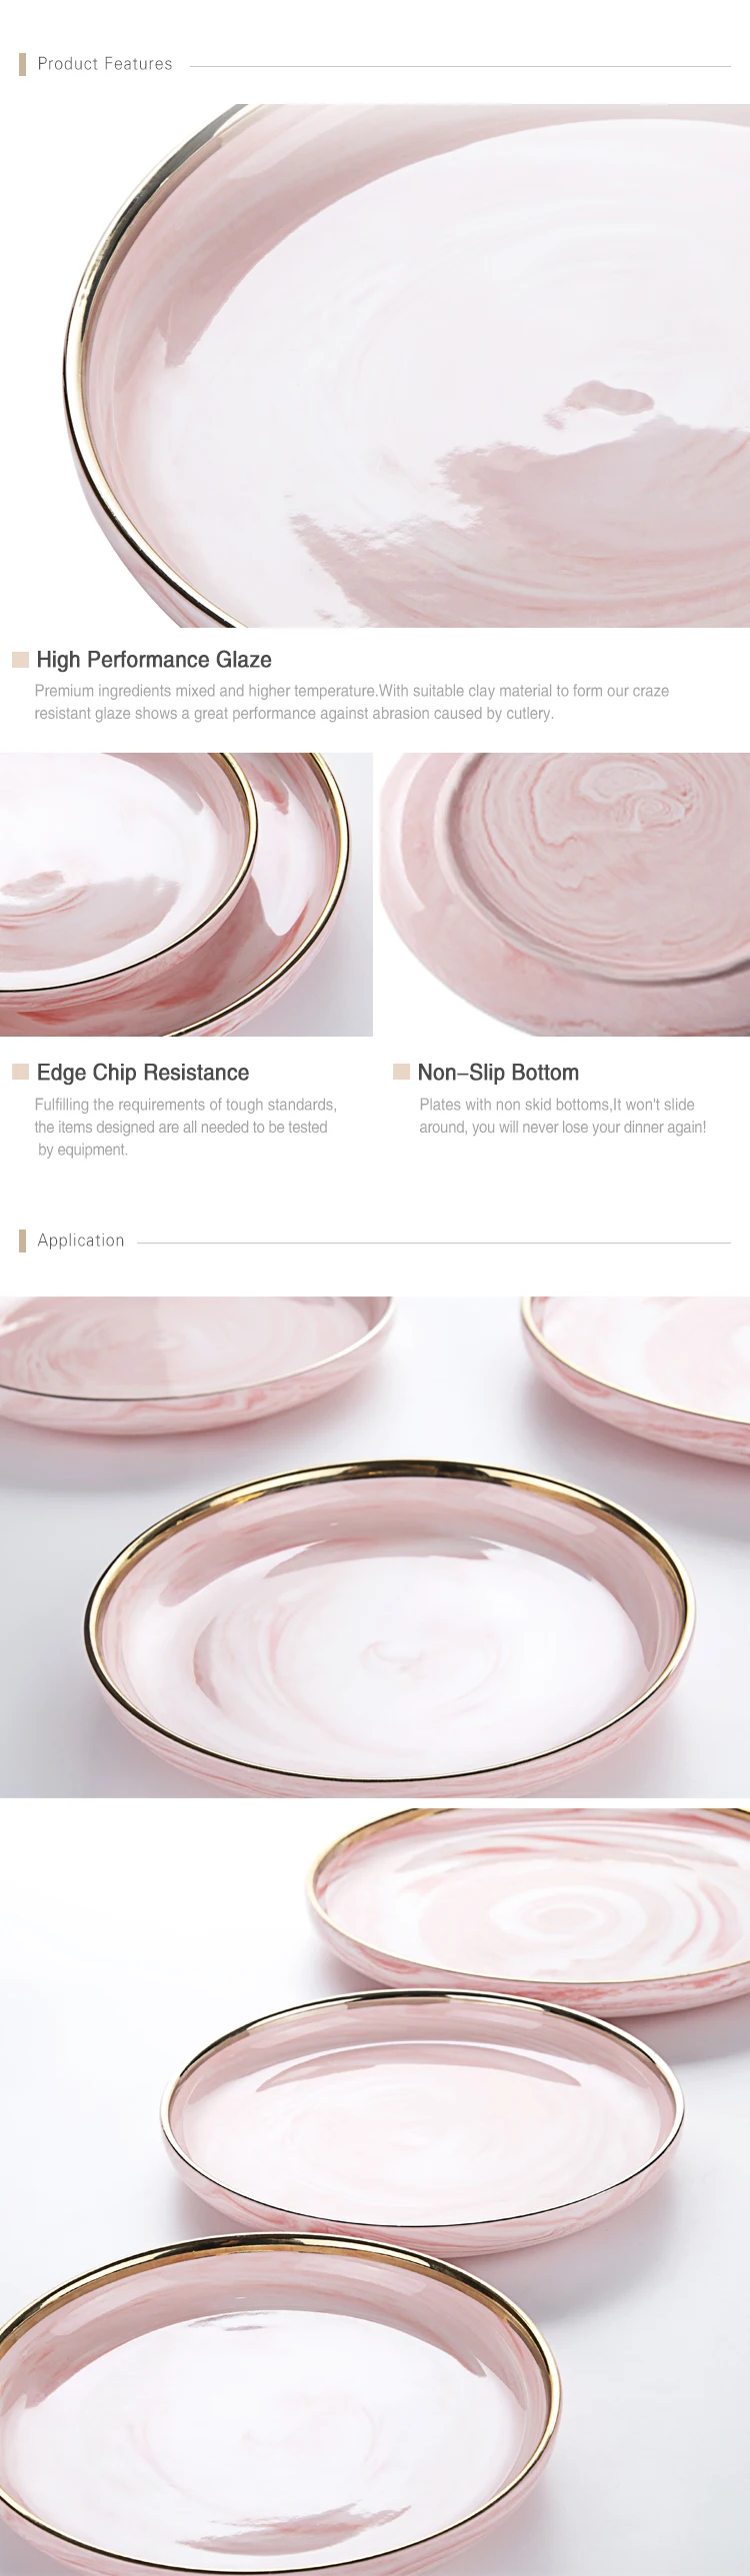 3 Size Microwave Safe Dinnerware Luxury Hotel Supplies China Tableware  Pink Marble Plate Wedding&